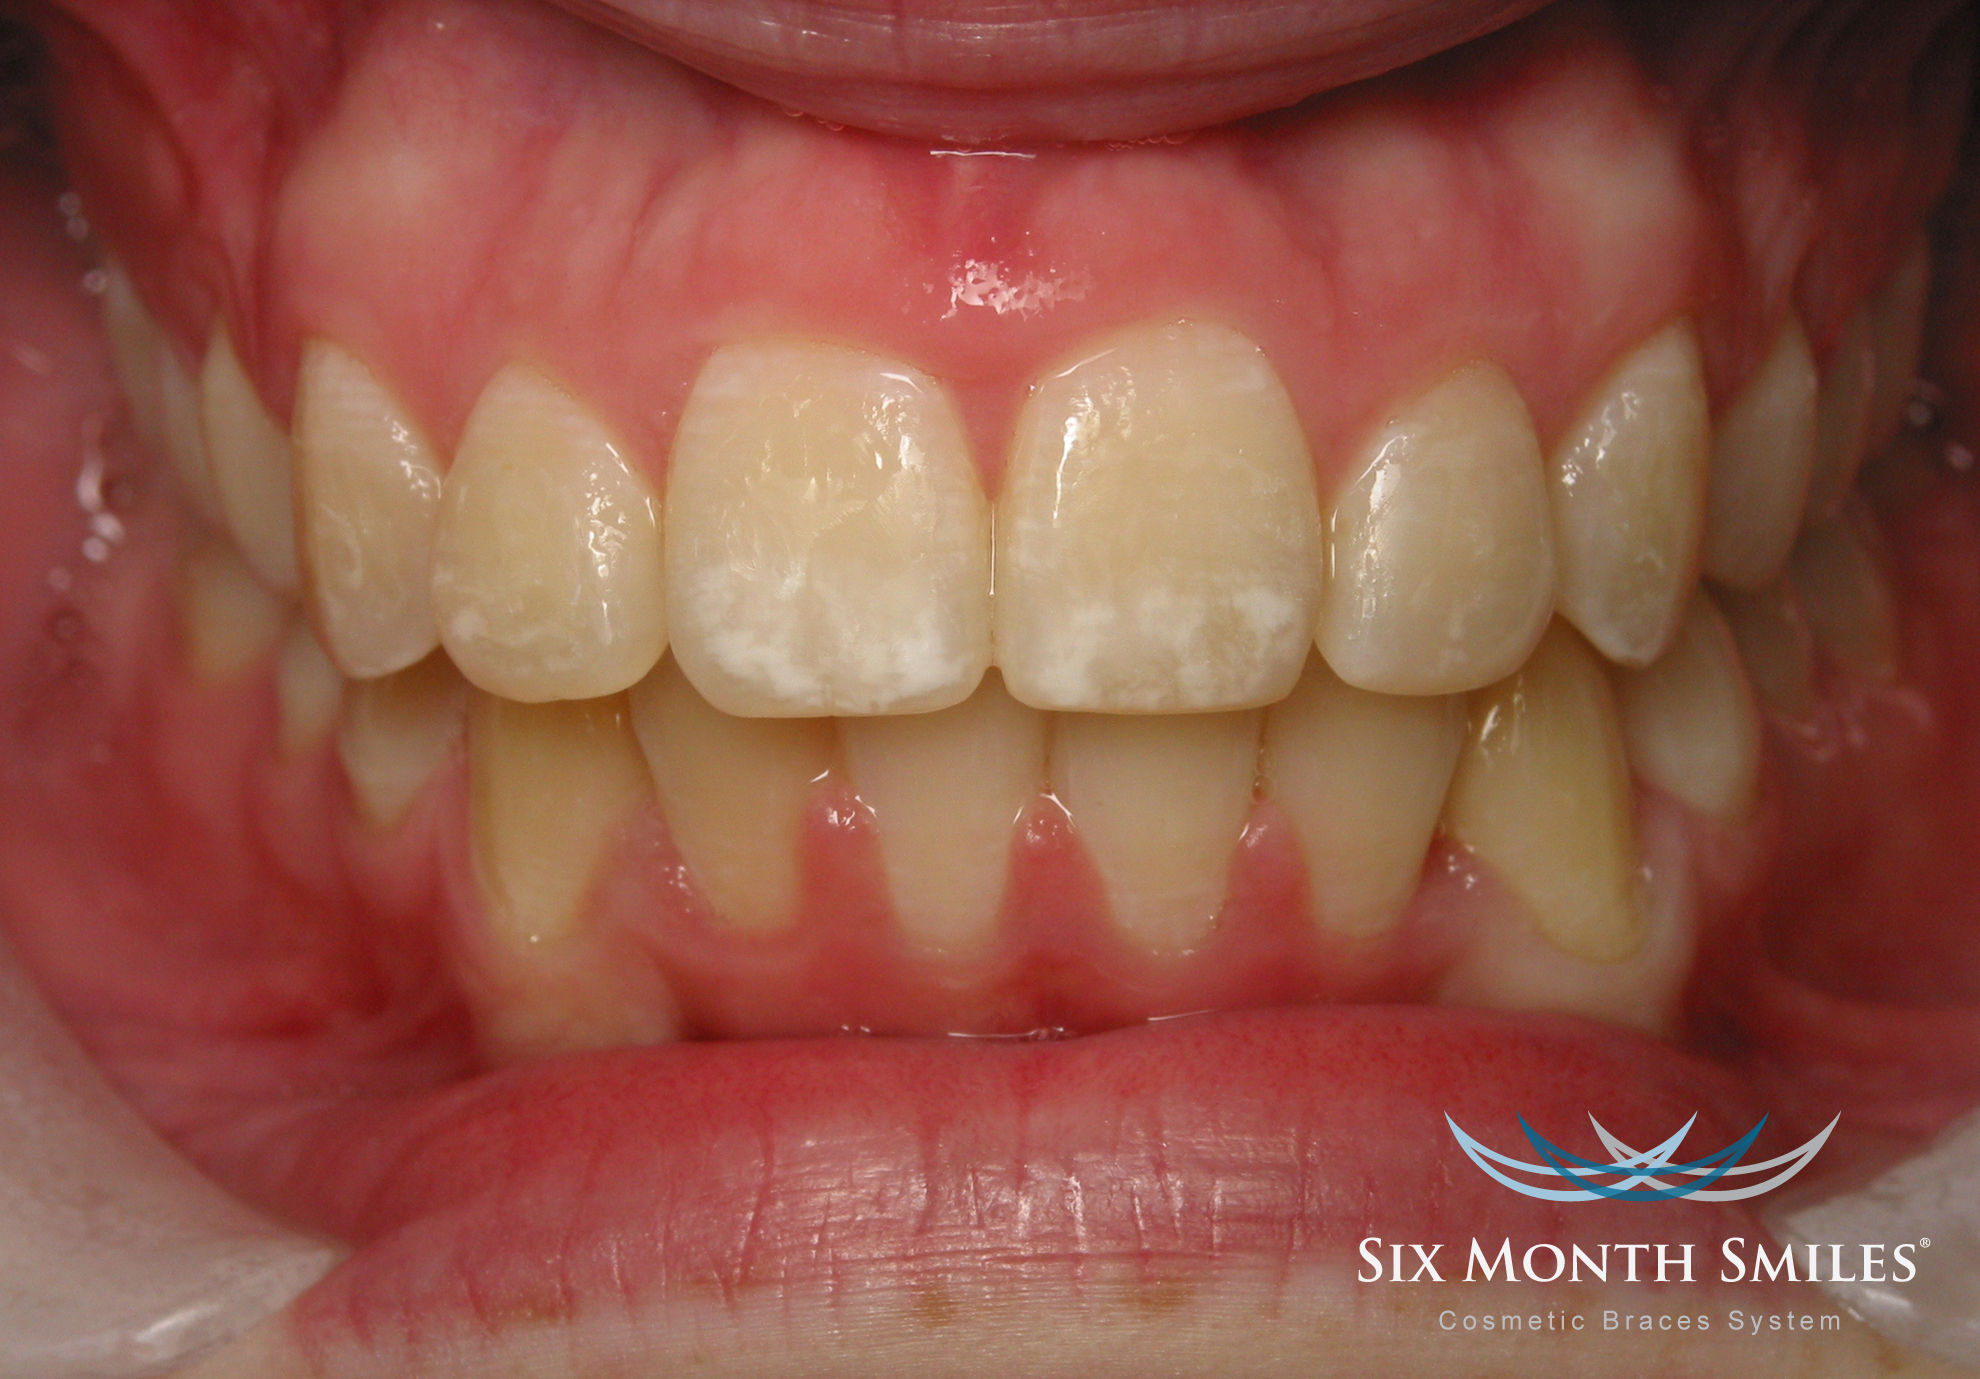 photo of patient teeth after Six Month Smiles cosmetic adult braces orthodontic